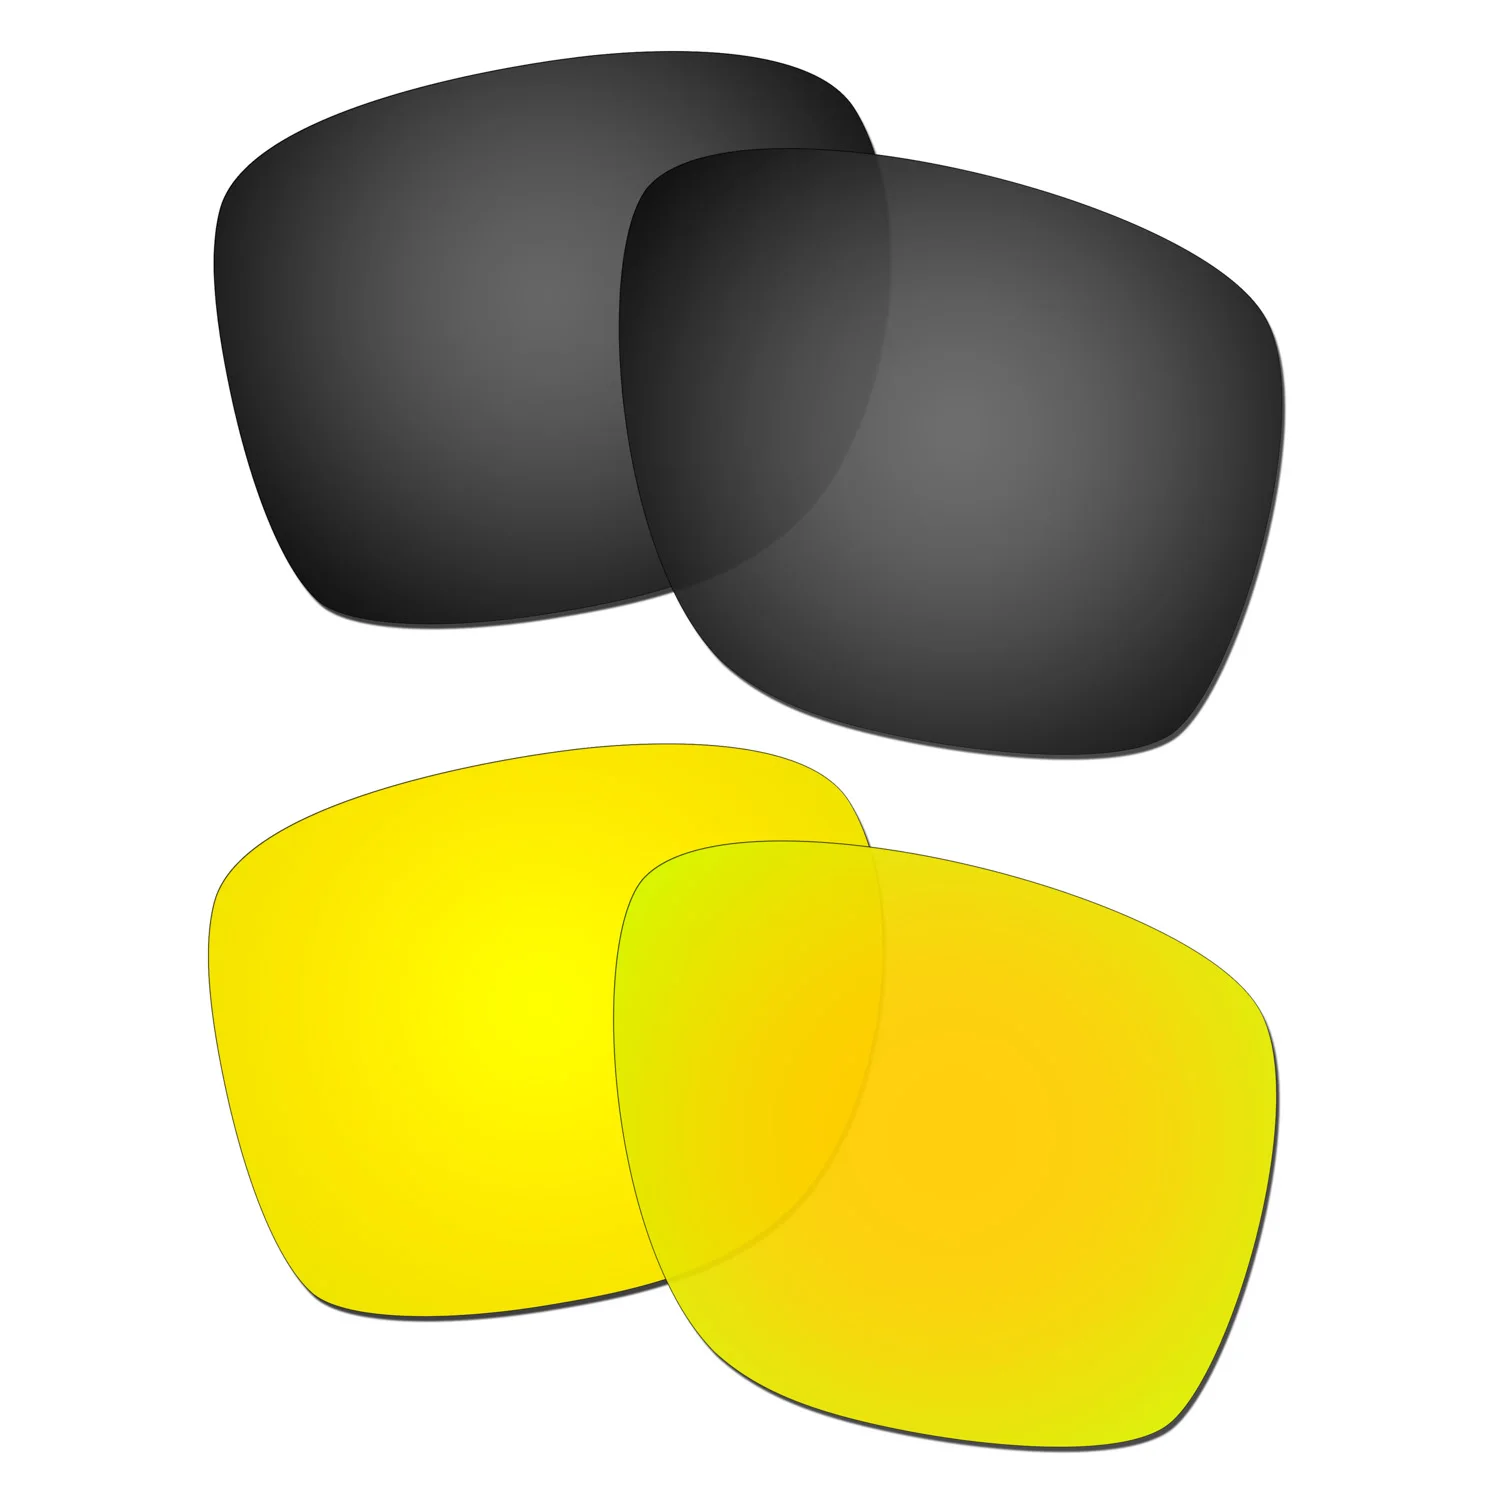 

HKUCO Polarized Replacement Lenses For Sliver XL Sunglasses Black/Gold 2 Pairs